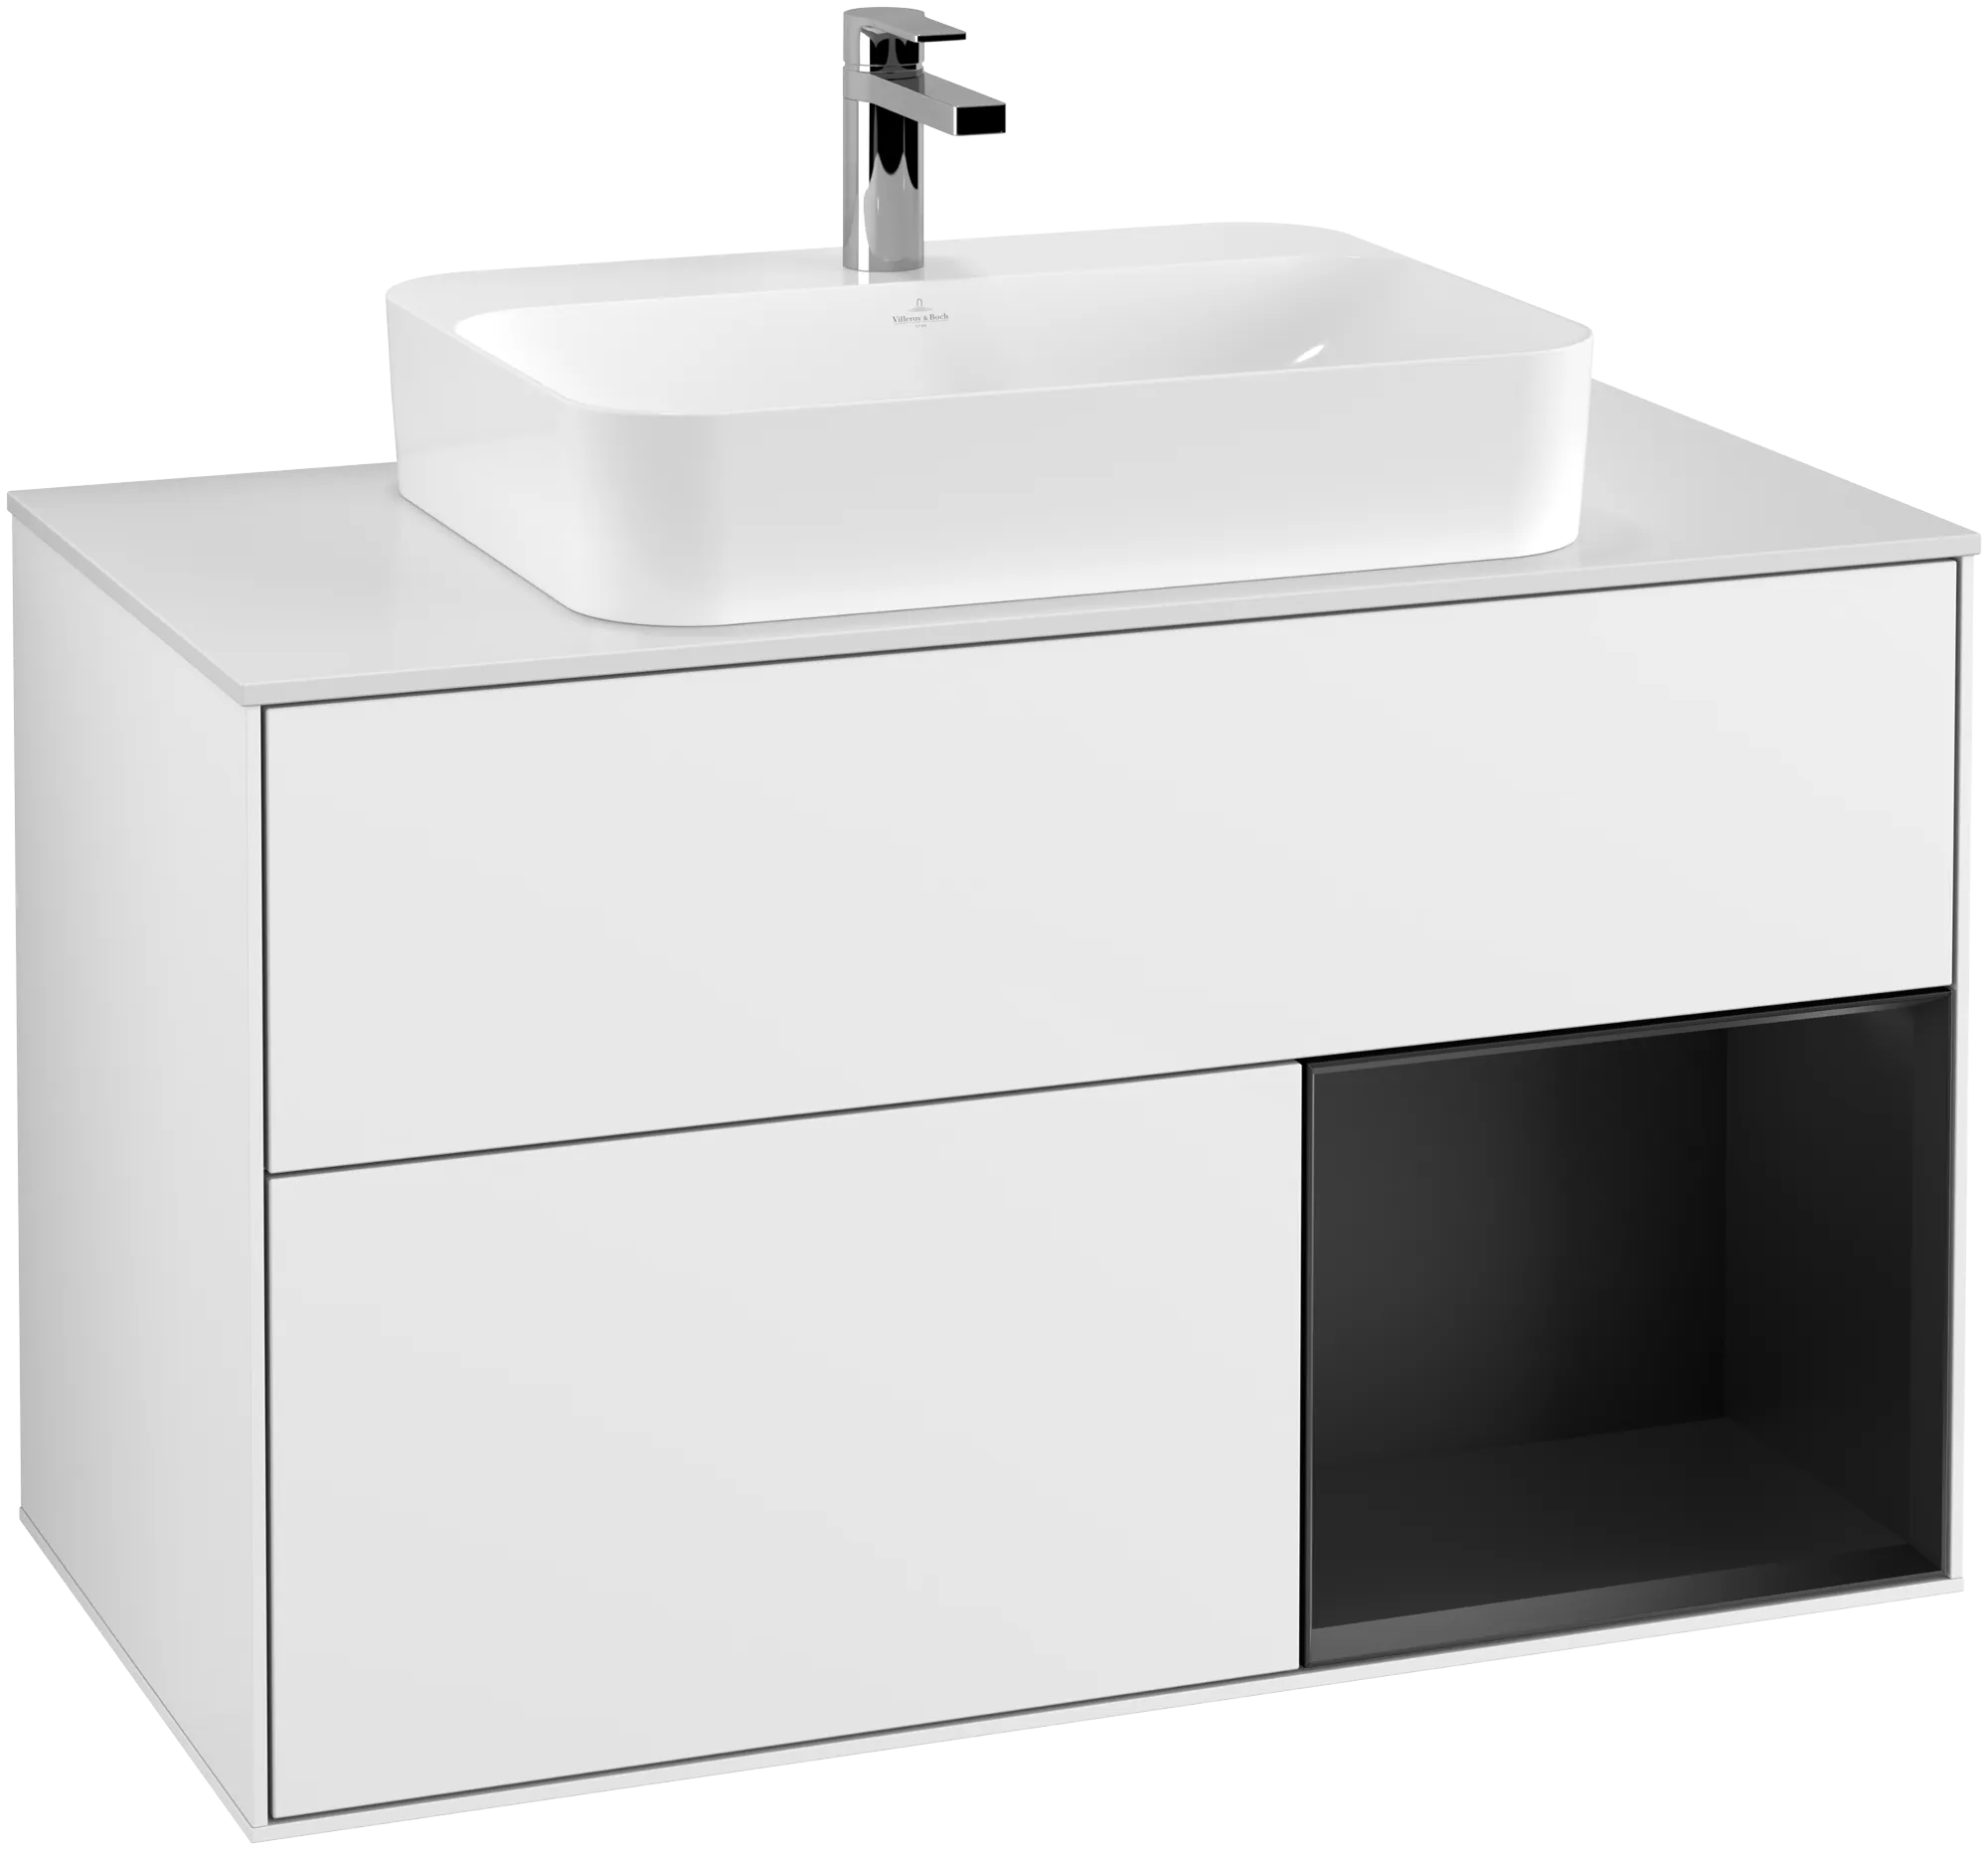 Obrázek VILLEROY BOCH Finion Vanity unit, with lighting, 2 pull-out compartments, 1000 x 603 x 501 mm, Glossy White Lacquer / Black Matt Lacquer / Glass White Matt #G371PDGF